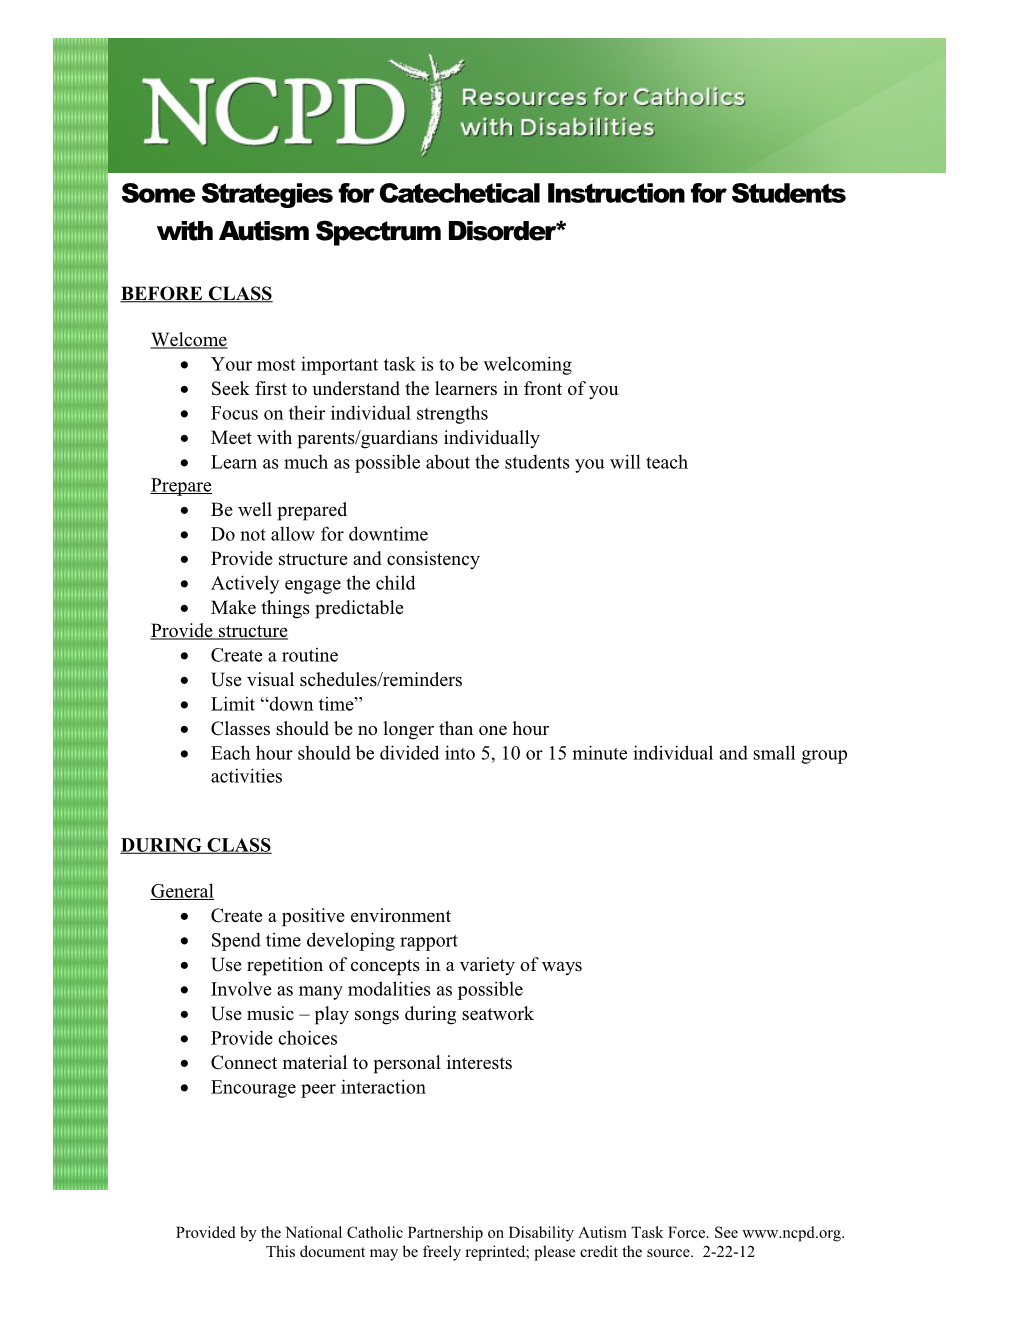 Some Strategies for Catechetical Instruction for Students with Autism Spectrum Disorder*